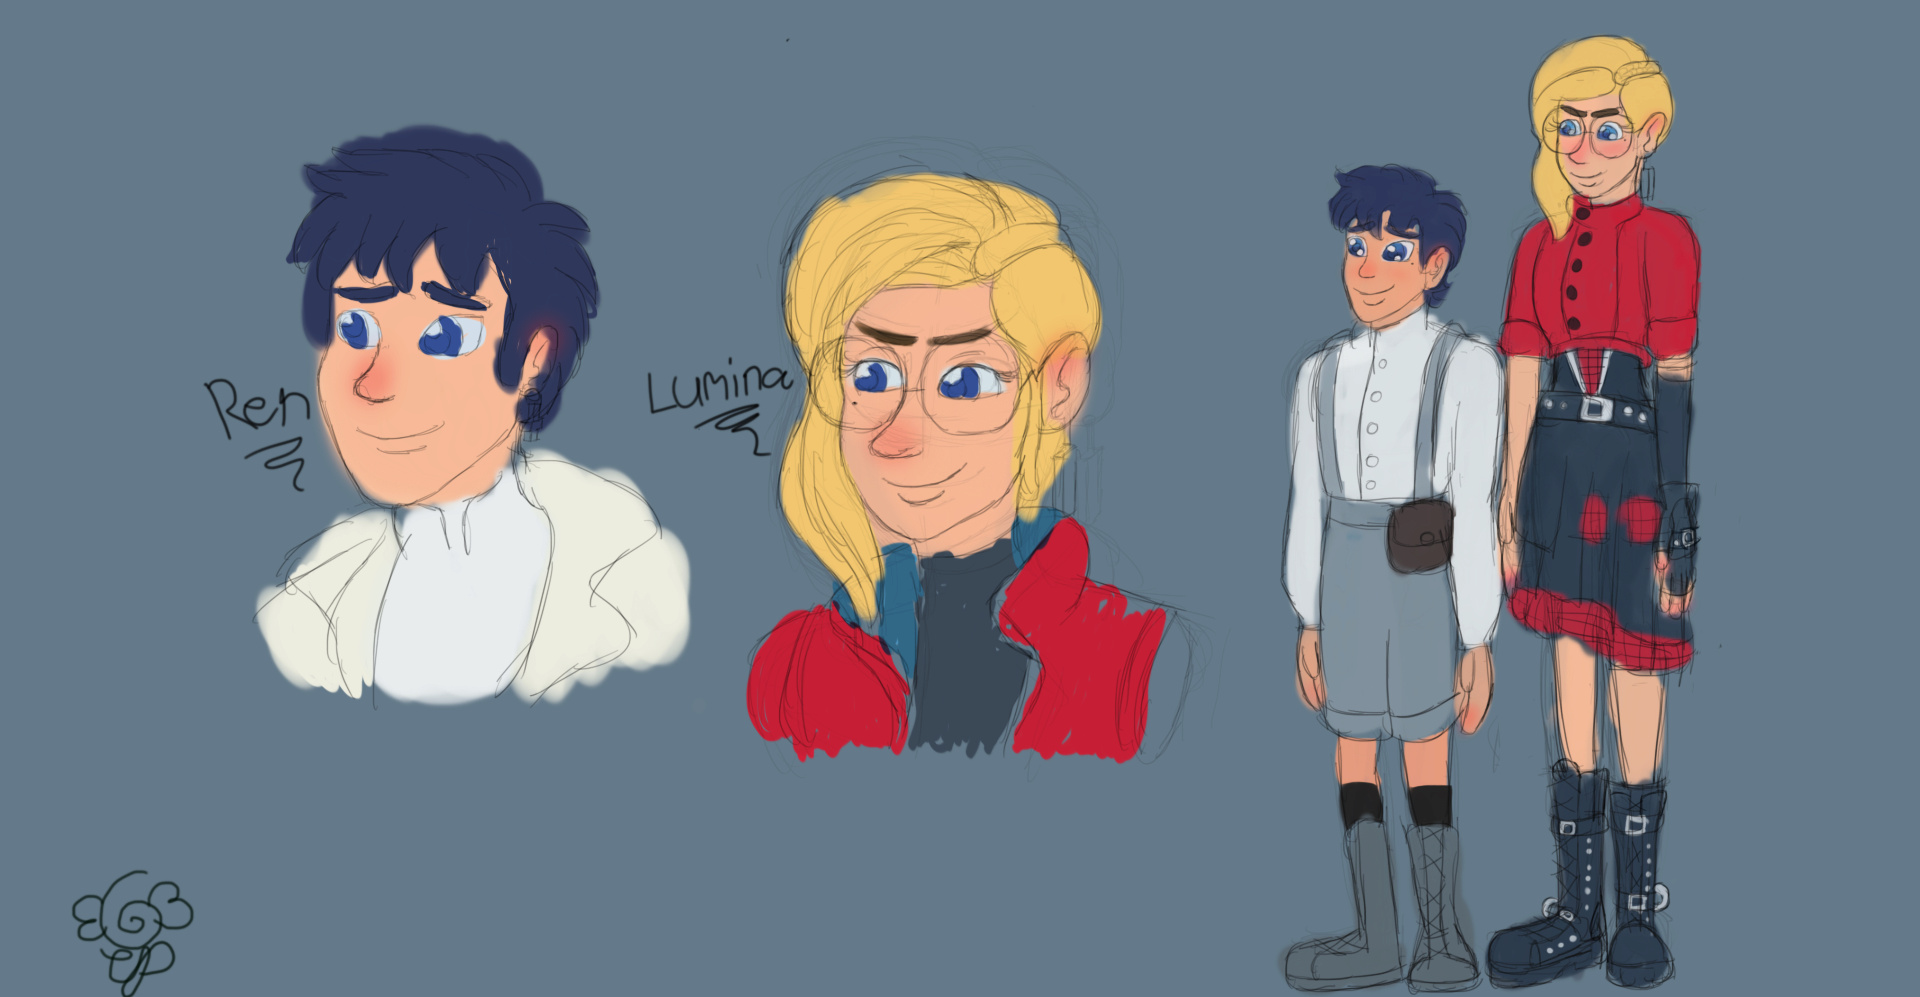 My take on Vash's and Meryl's children, Fan kids basically. Their names are Ren and Lumina